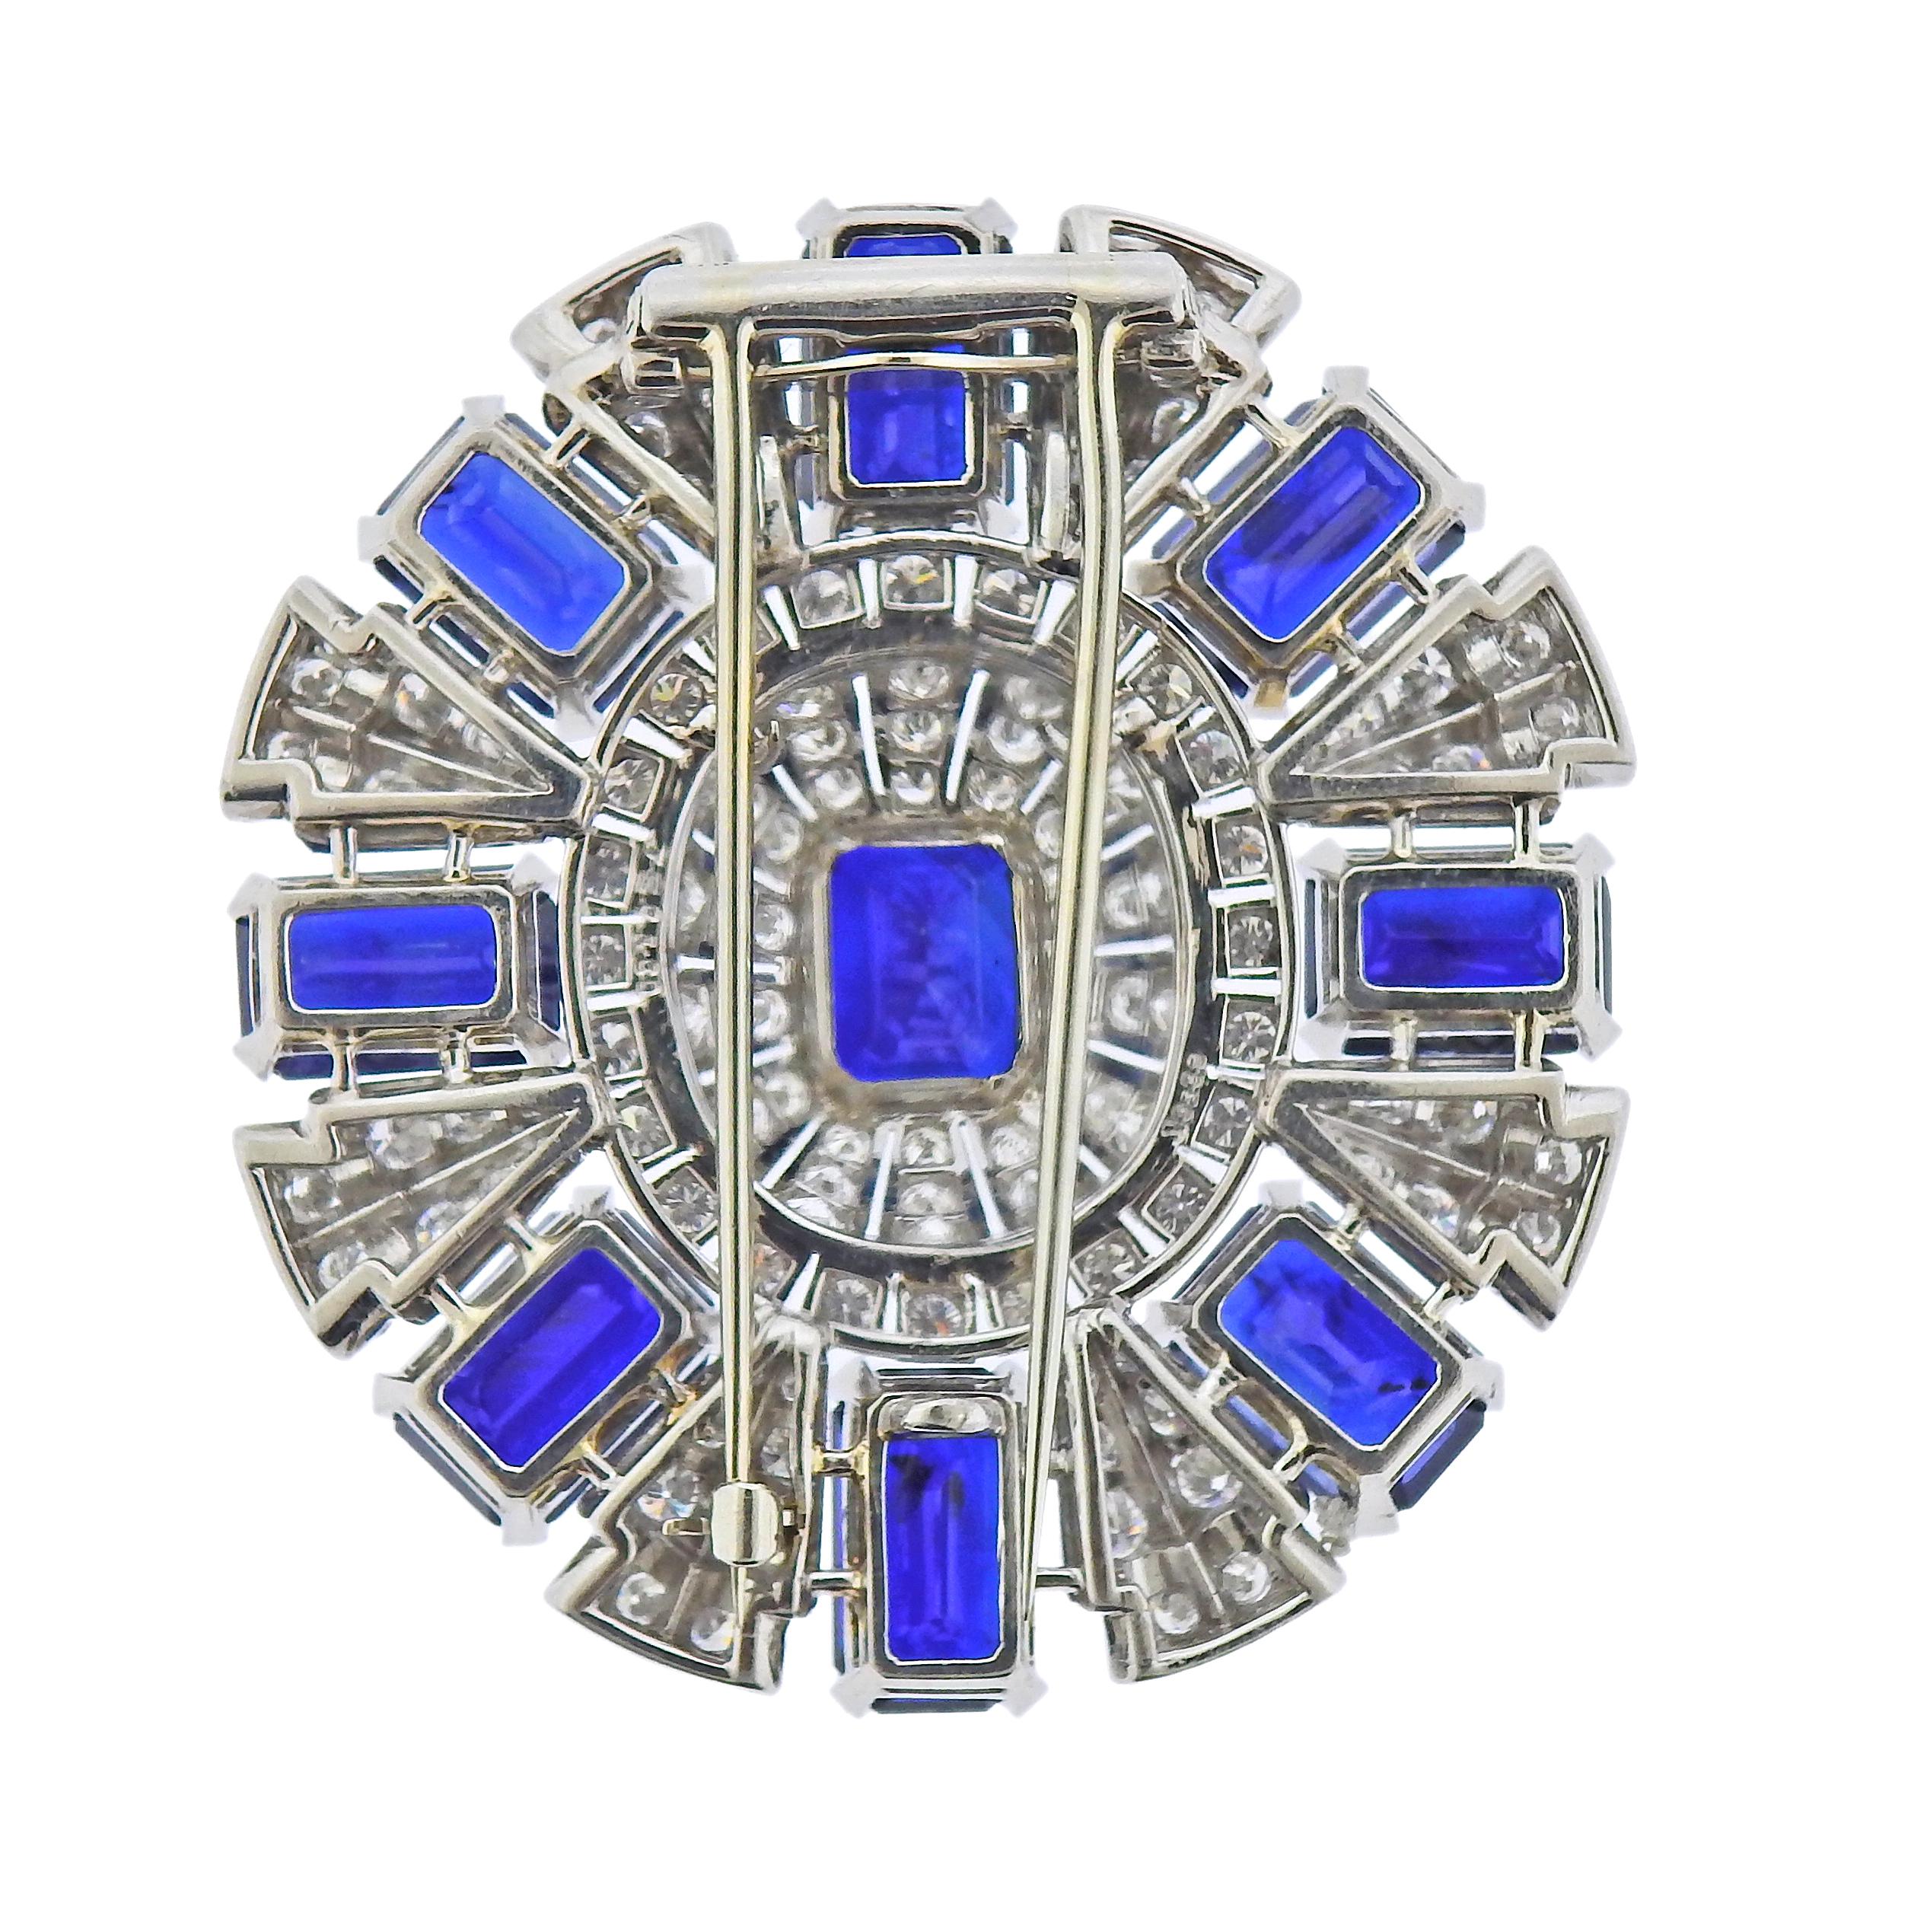 Art Deco platinum brooch by J.E. Caldwell & Co, set with 22.50ctw in sapphires and 4.30ctw in diamonds. Brooch is 1.75